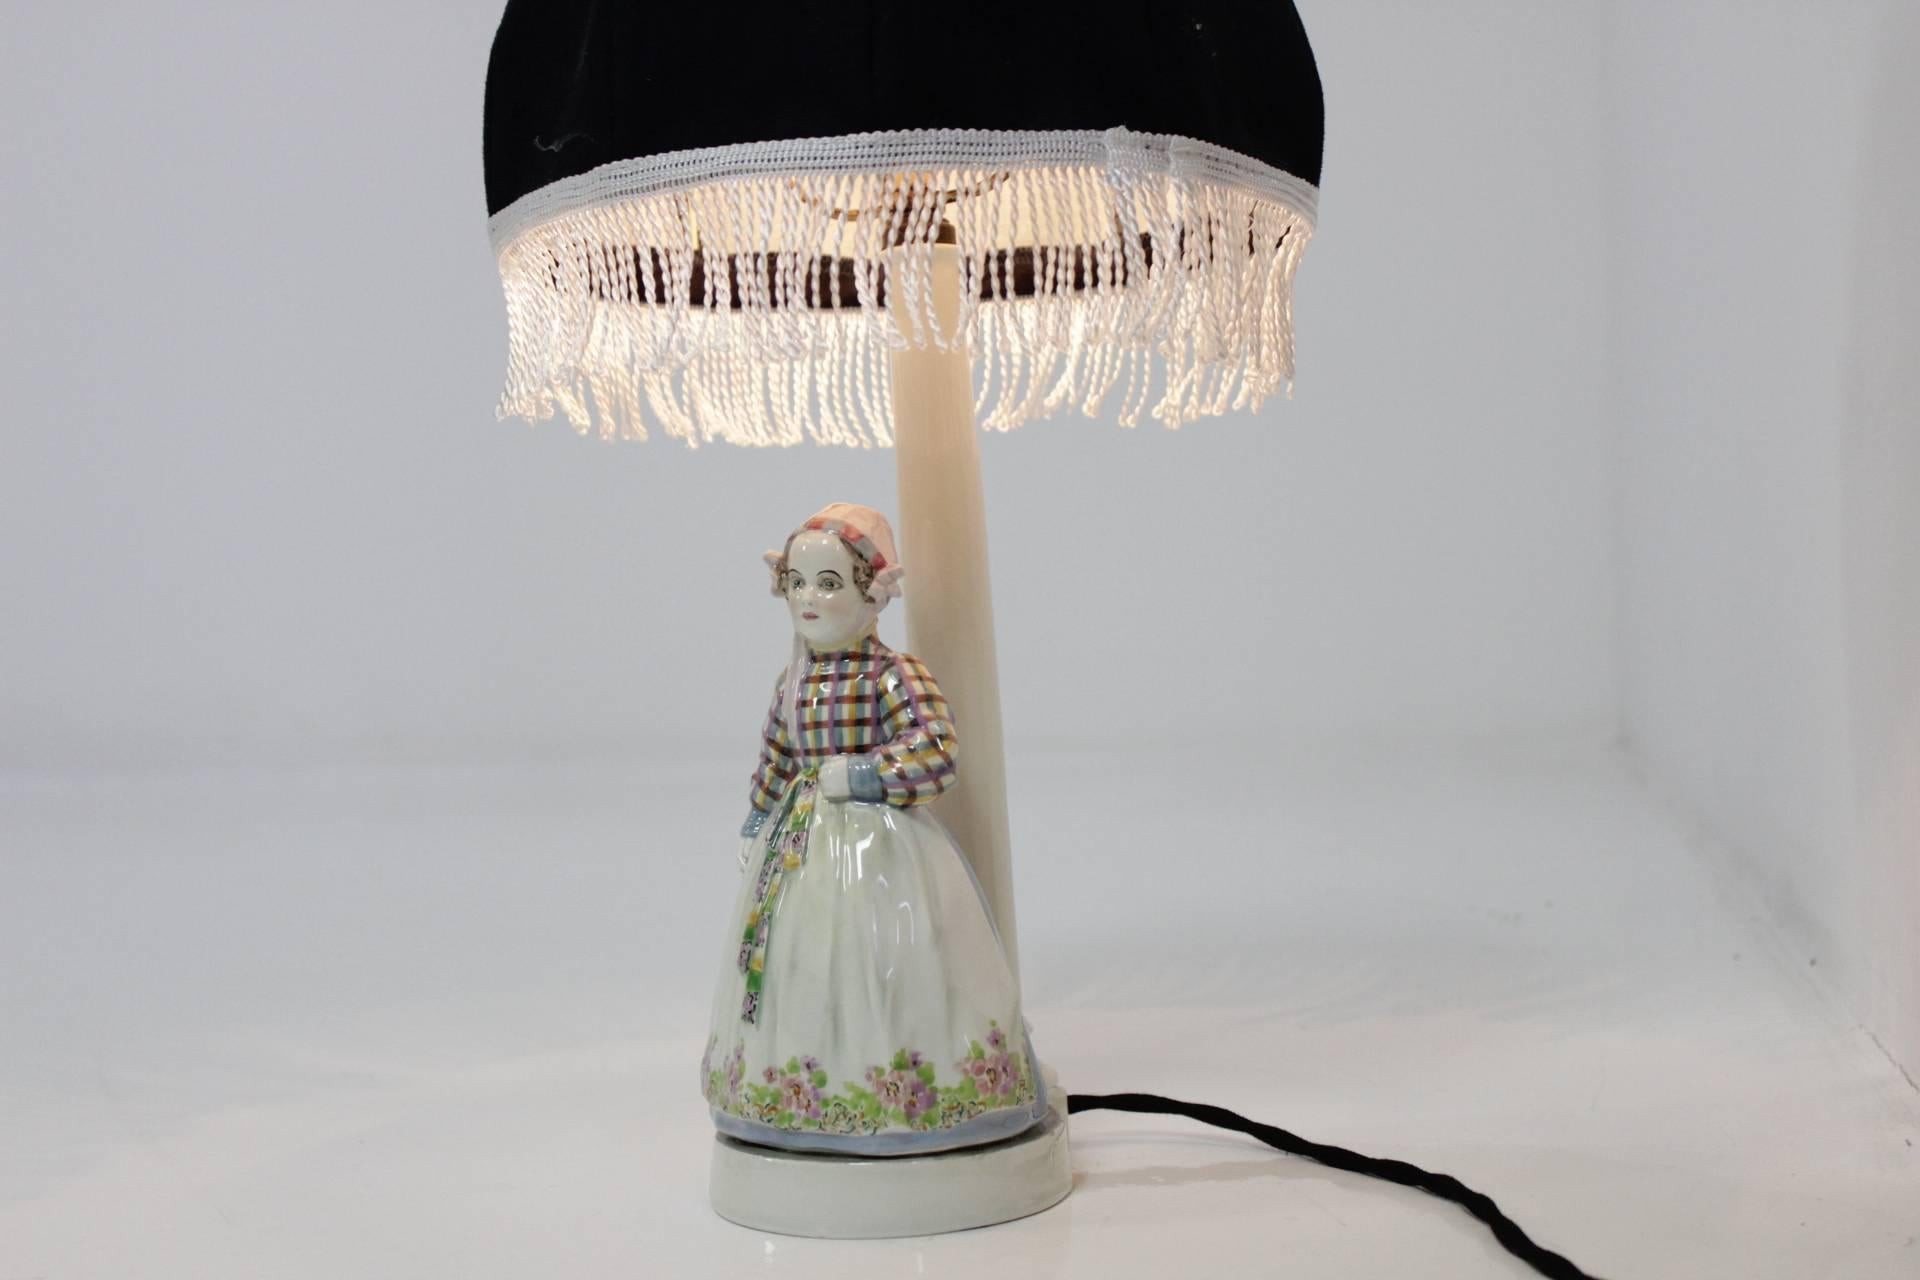 Beautiful porcelain lamp designed by Josef Lorenzl (signed) with new electricity and lampshade textile.